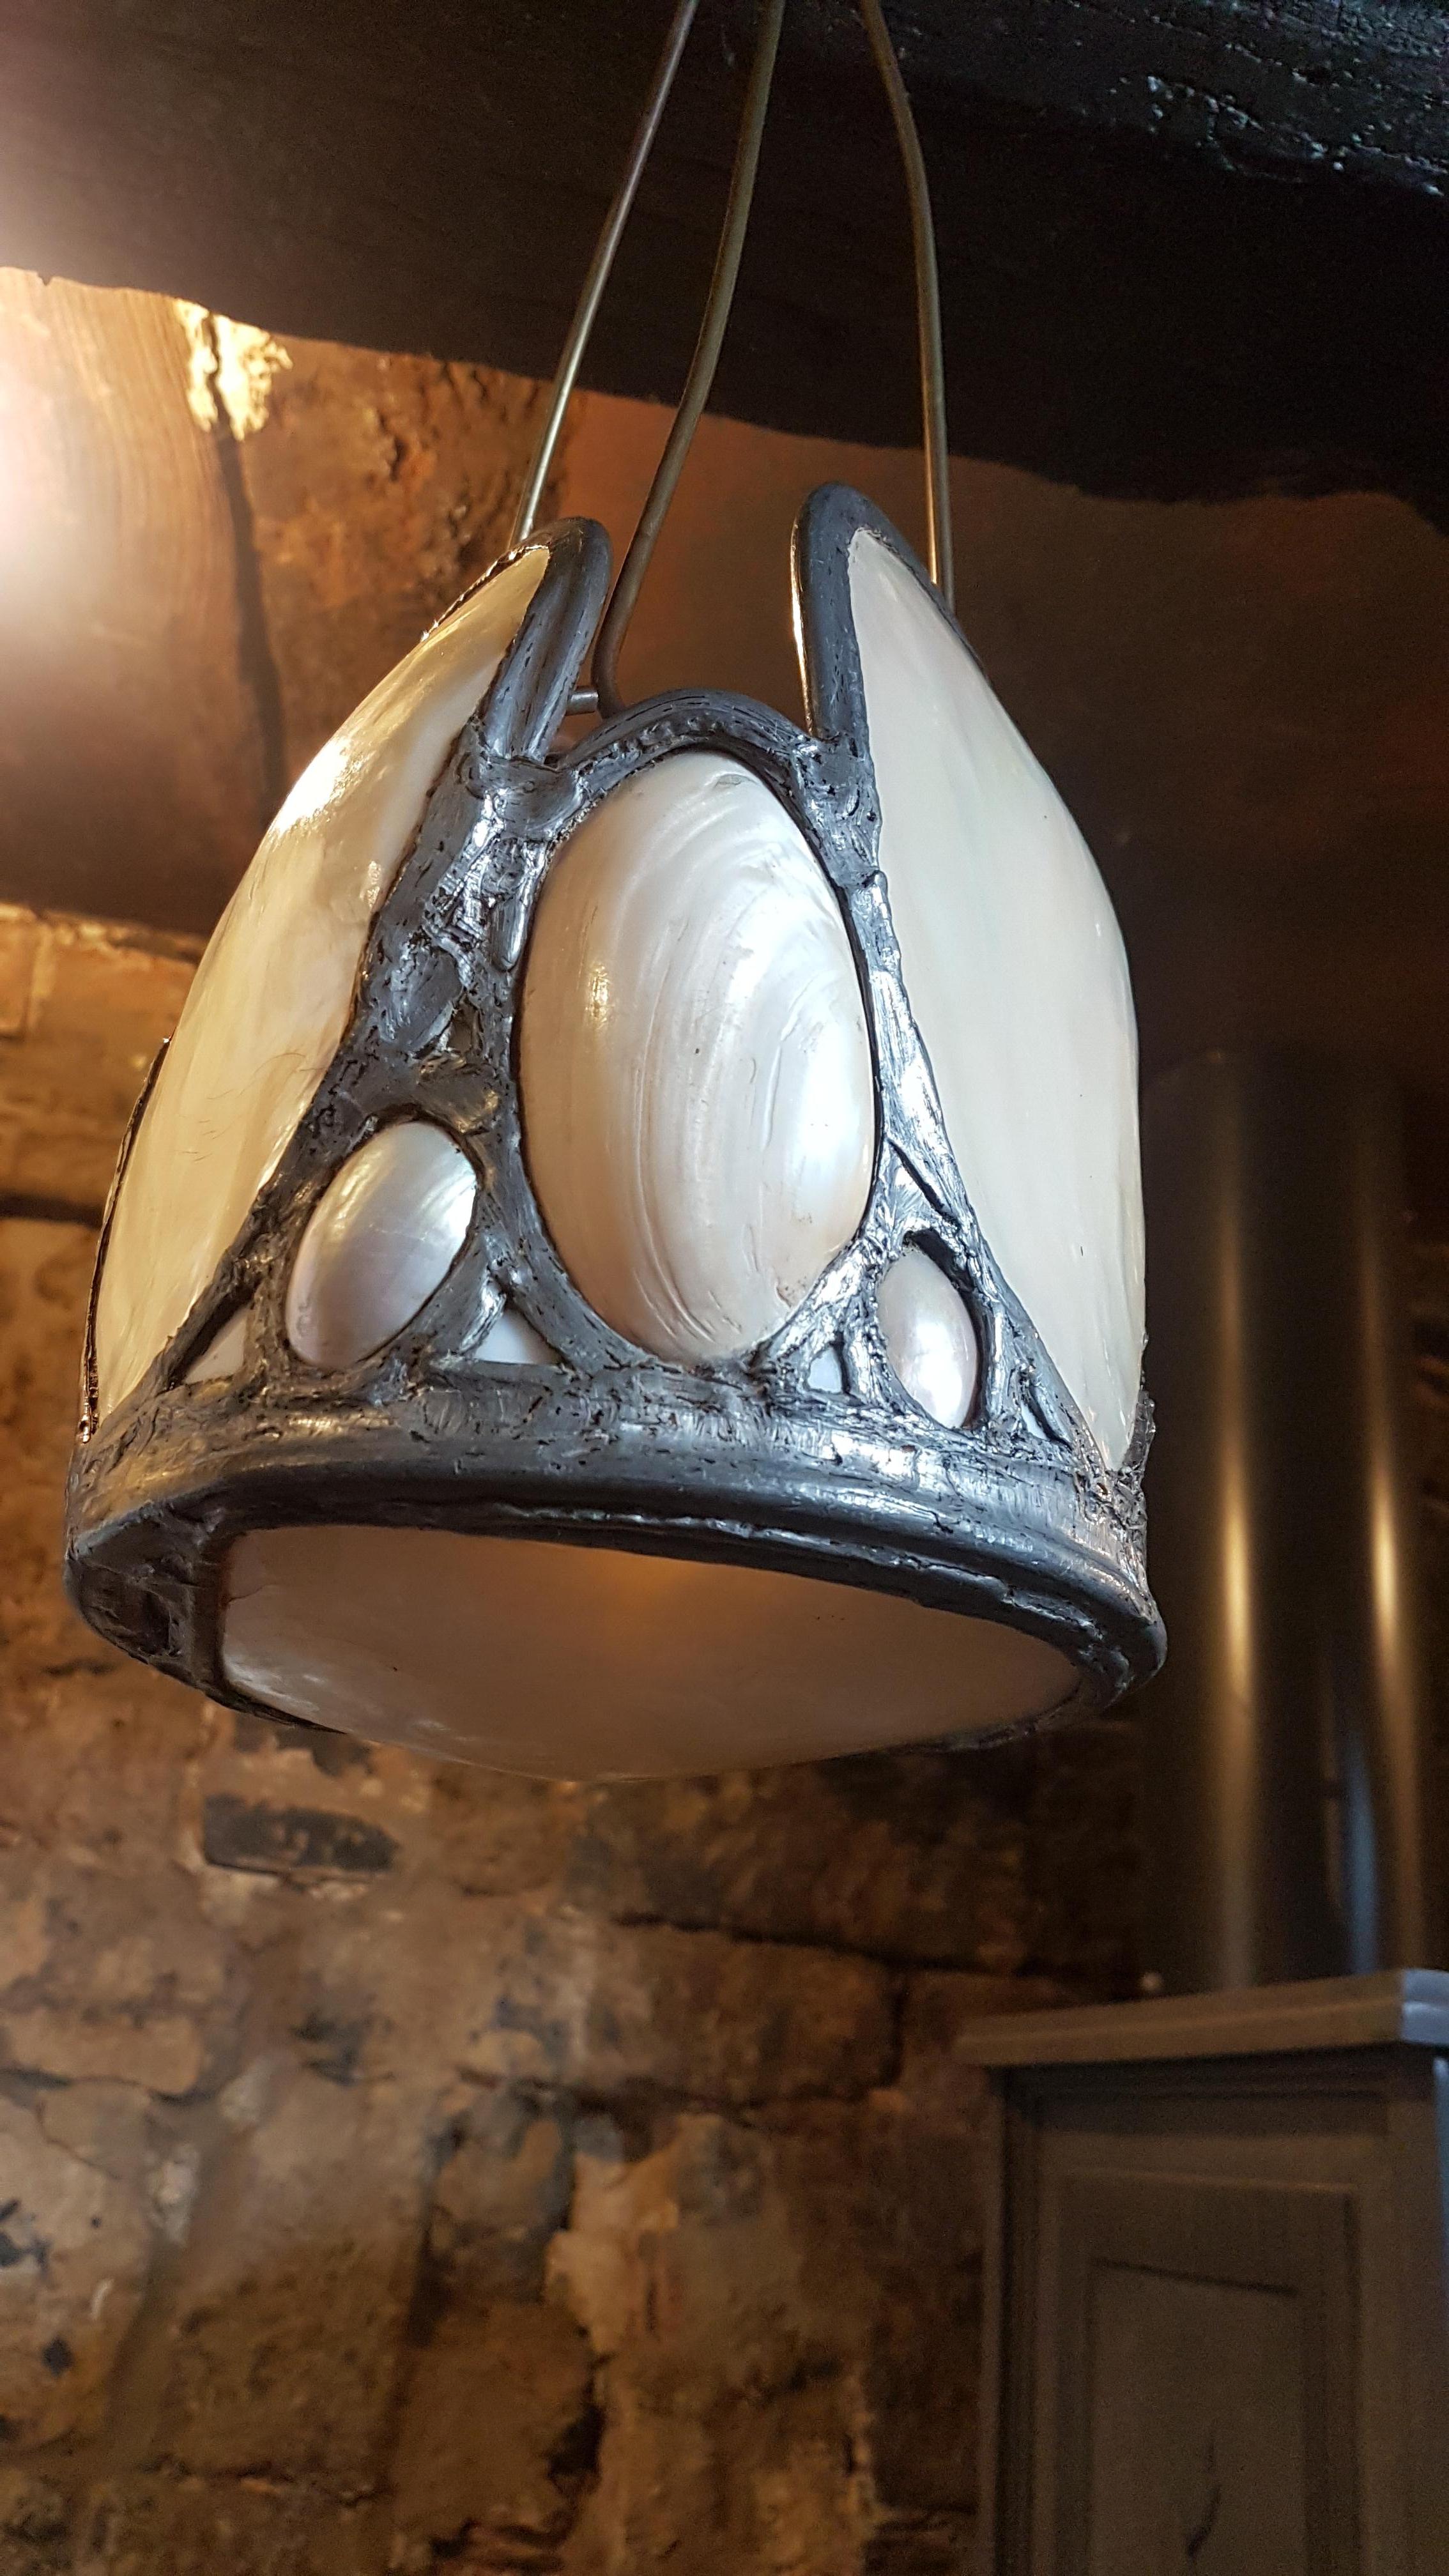 A superbly decorative and elegant custom made lantern that is constructed from large oyster shells that have a great opalescence to them when the light is on the inside with these being set in lead. The shells are all in excellent condition, the